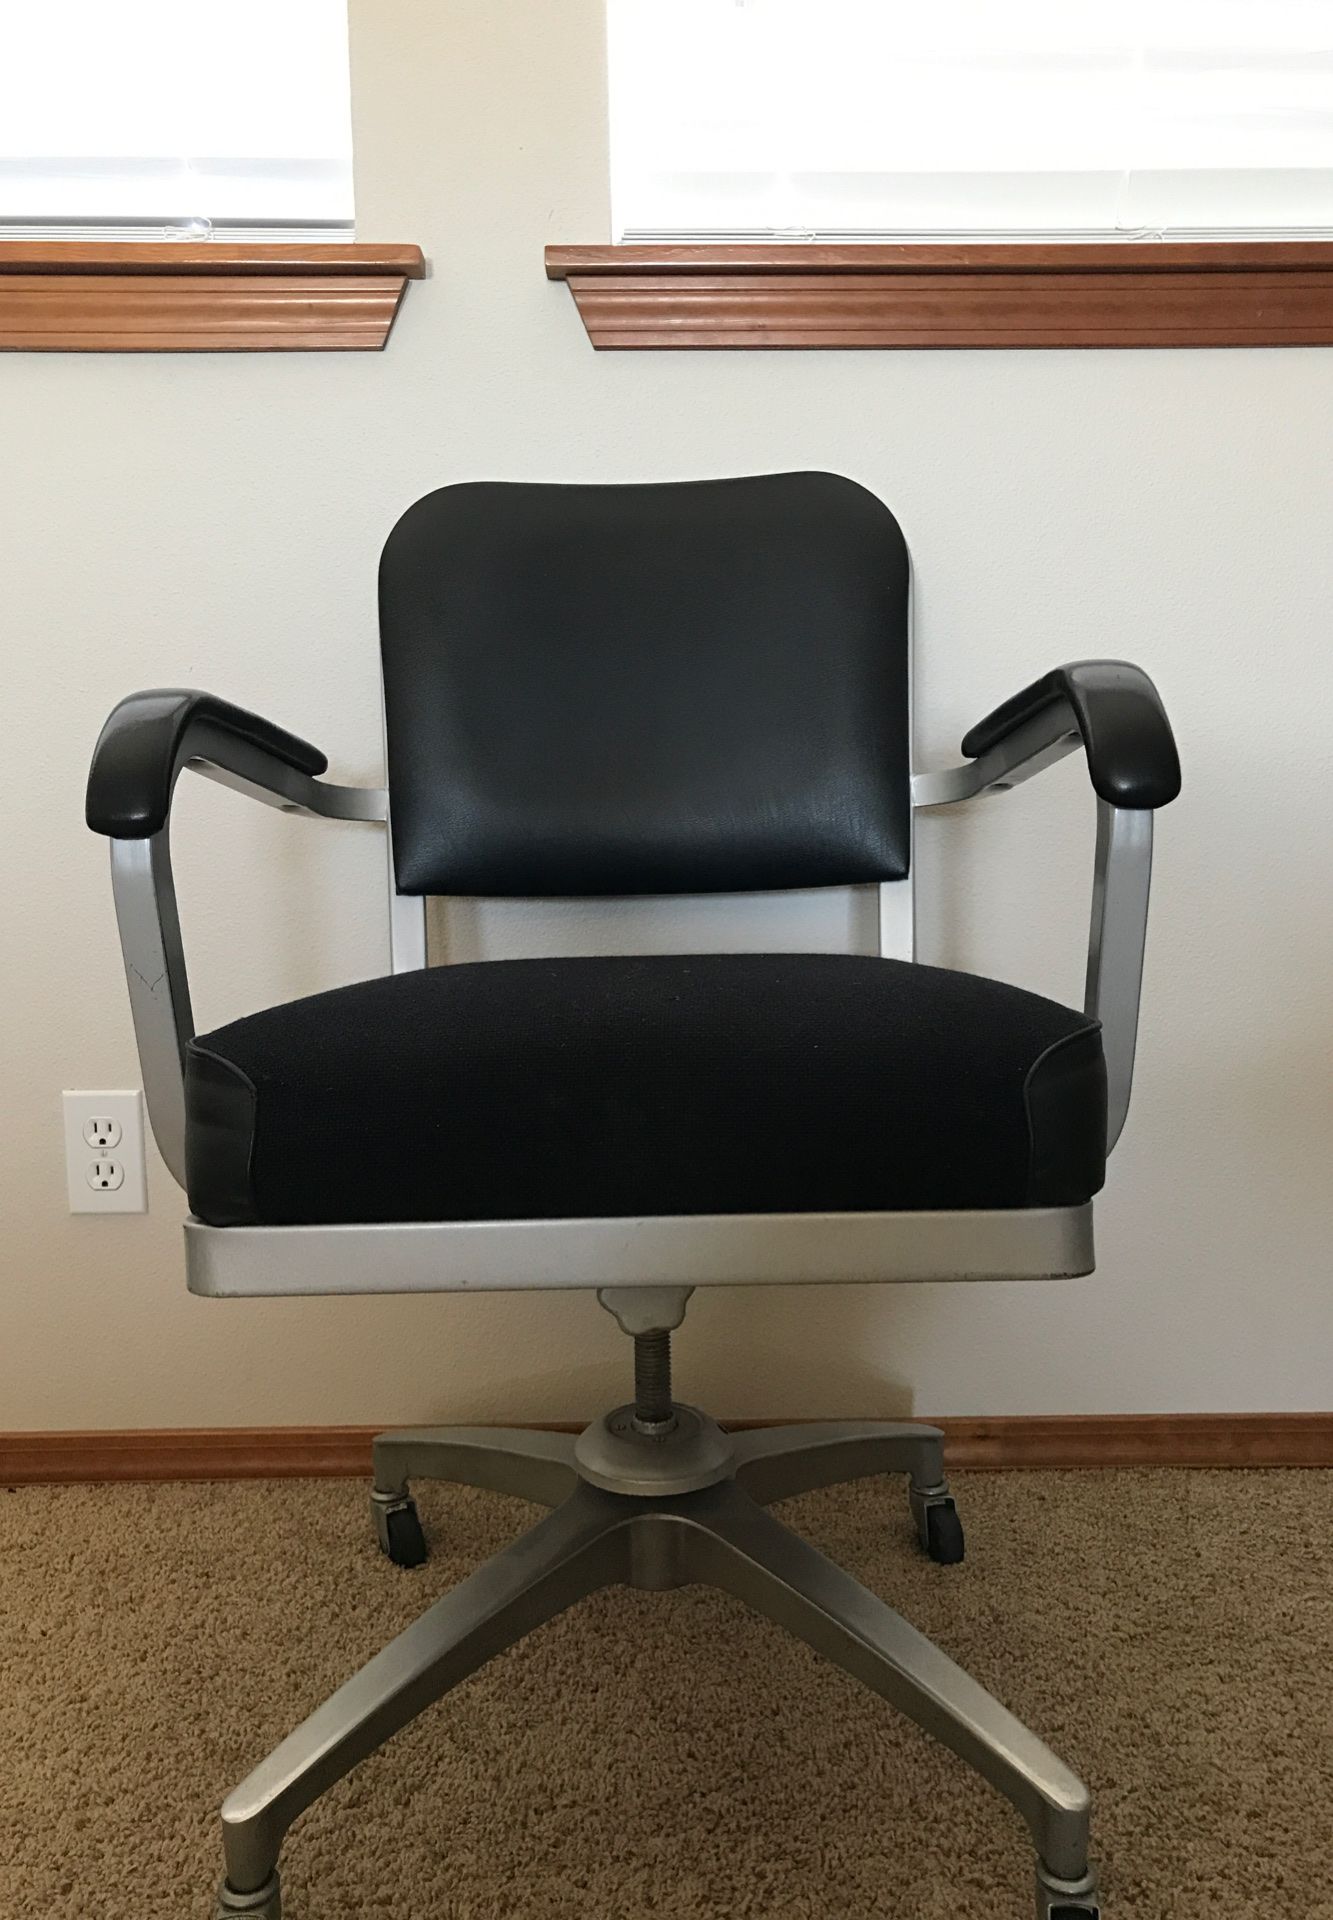 Spinning office chair with wheels.